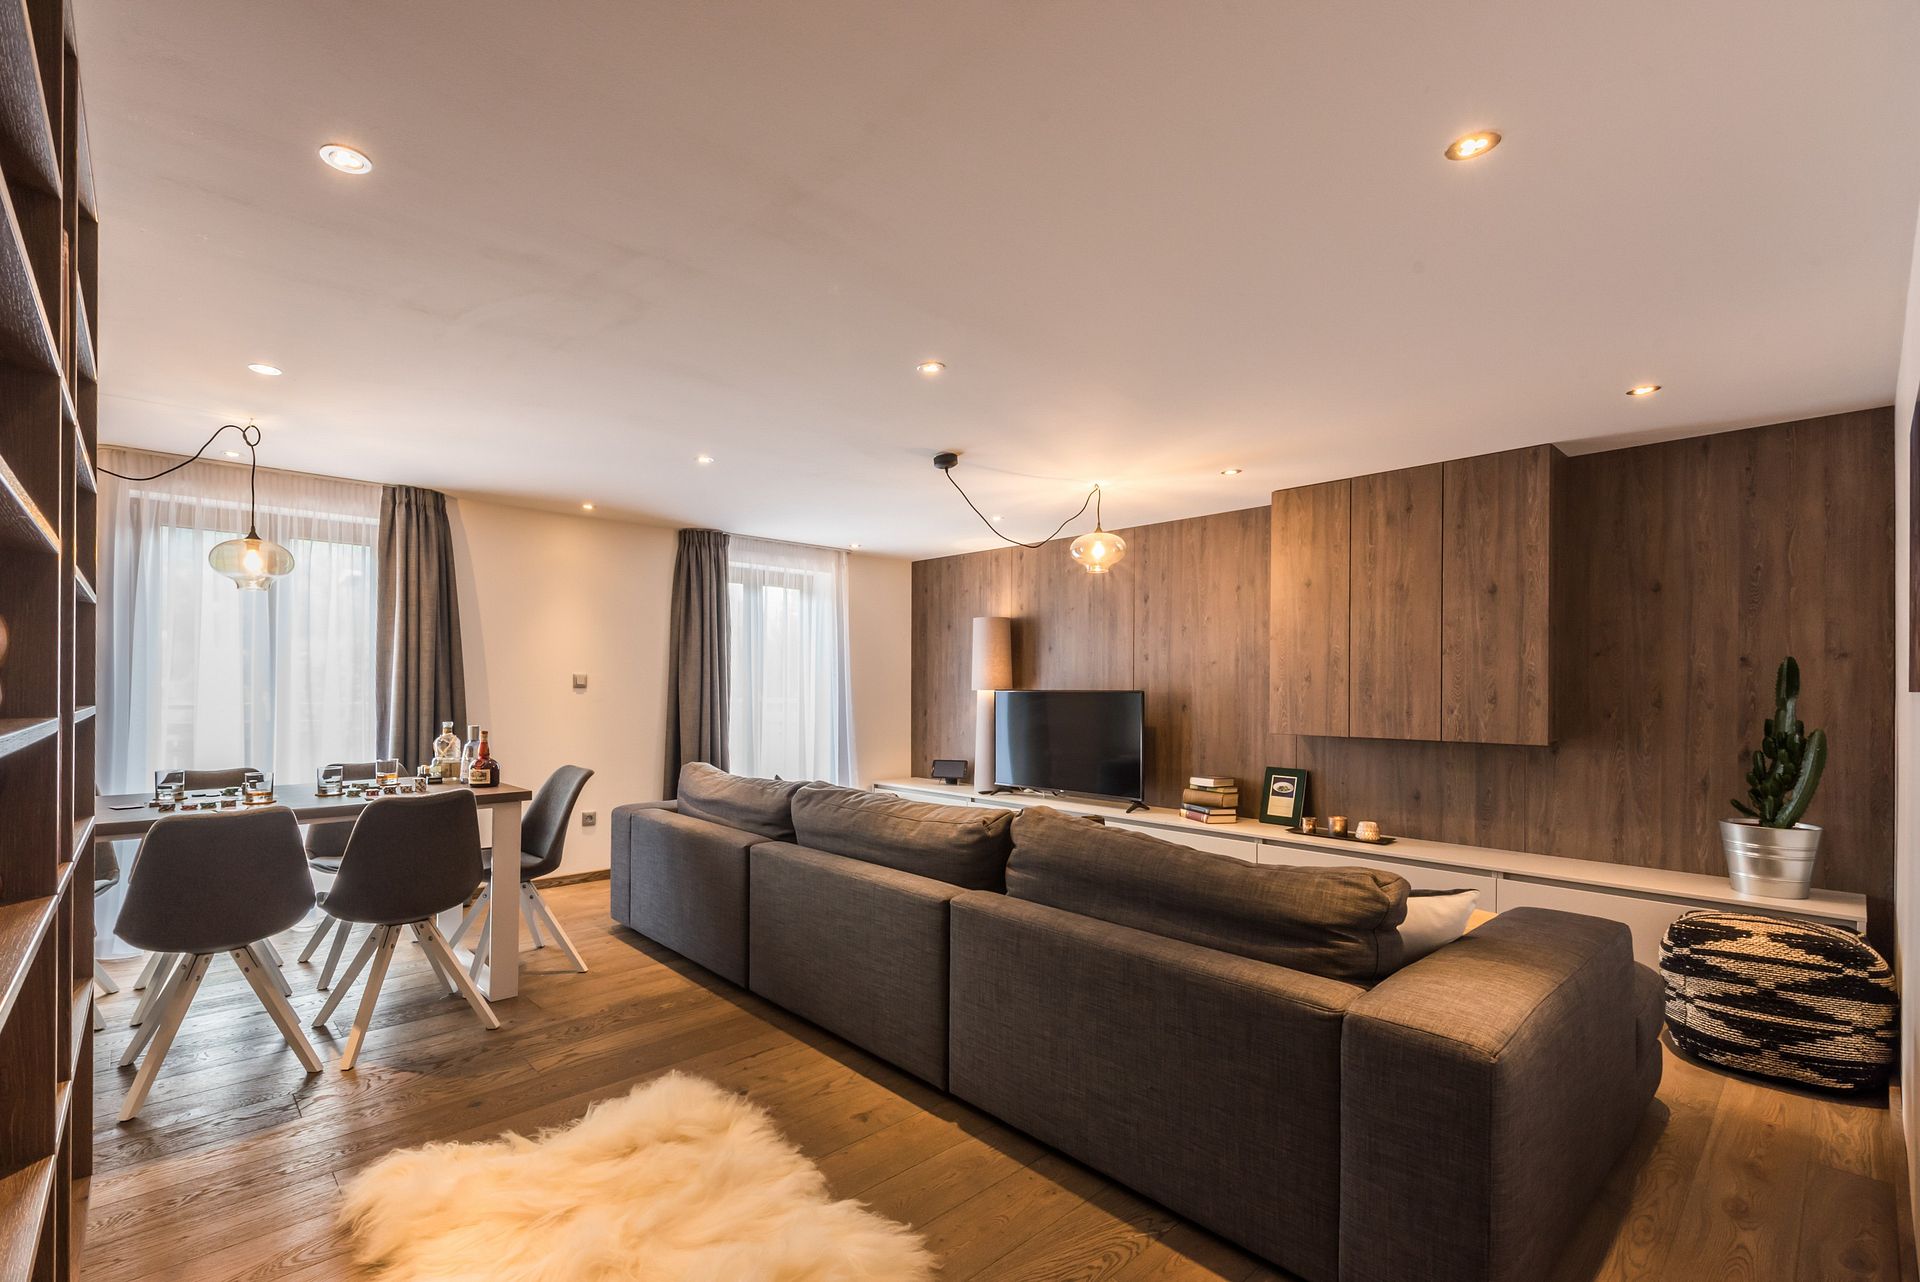 5 bed Apartment For Sale in Portes du Soleil, French Alps